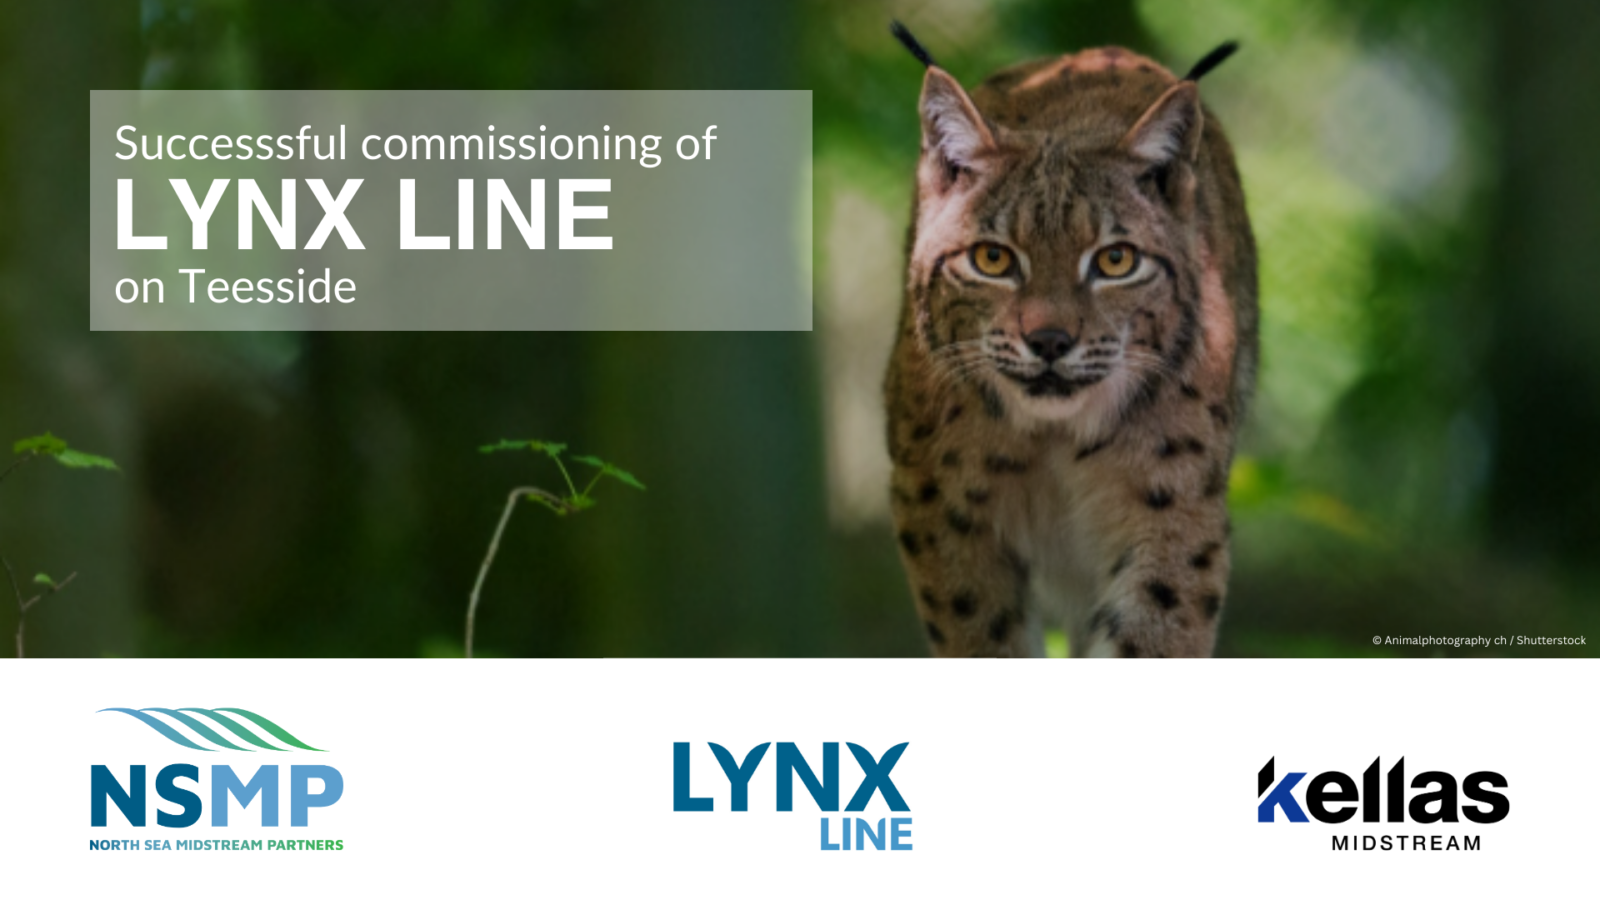 North Sea Midstream Partners and Kellas Midstream announce completion of commissioning of the Lynx Line